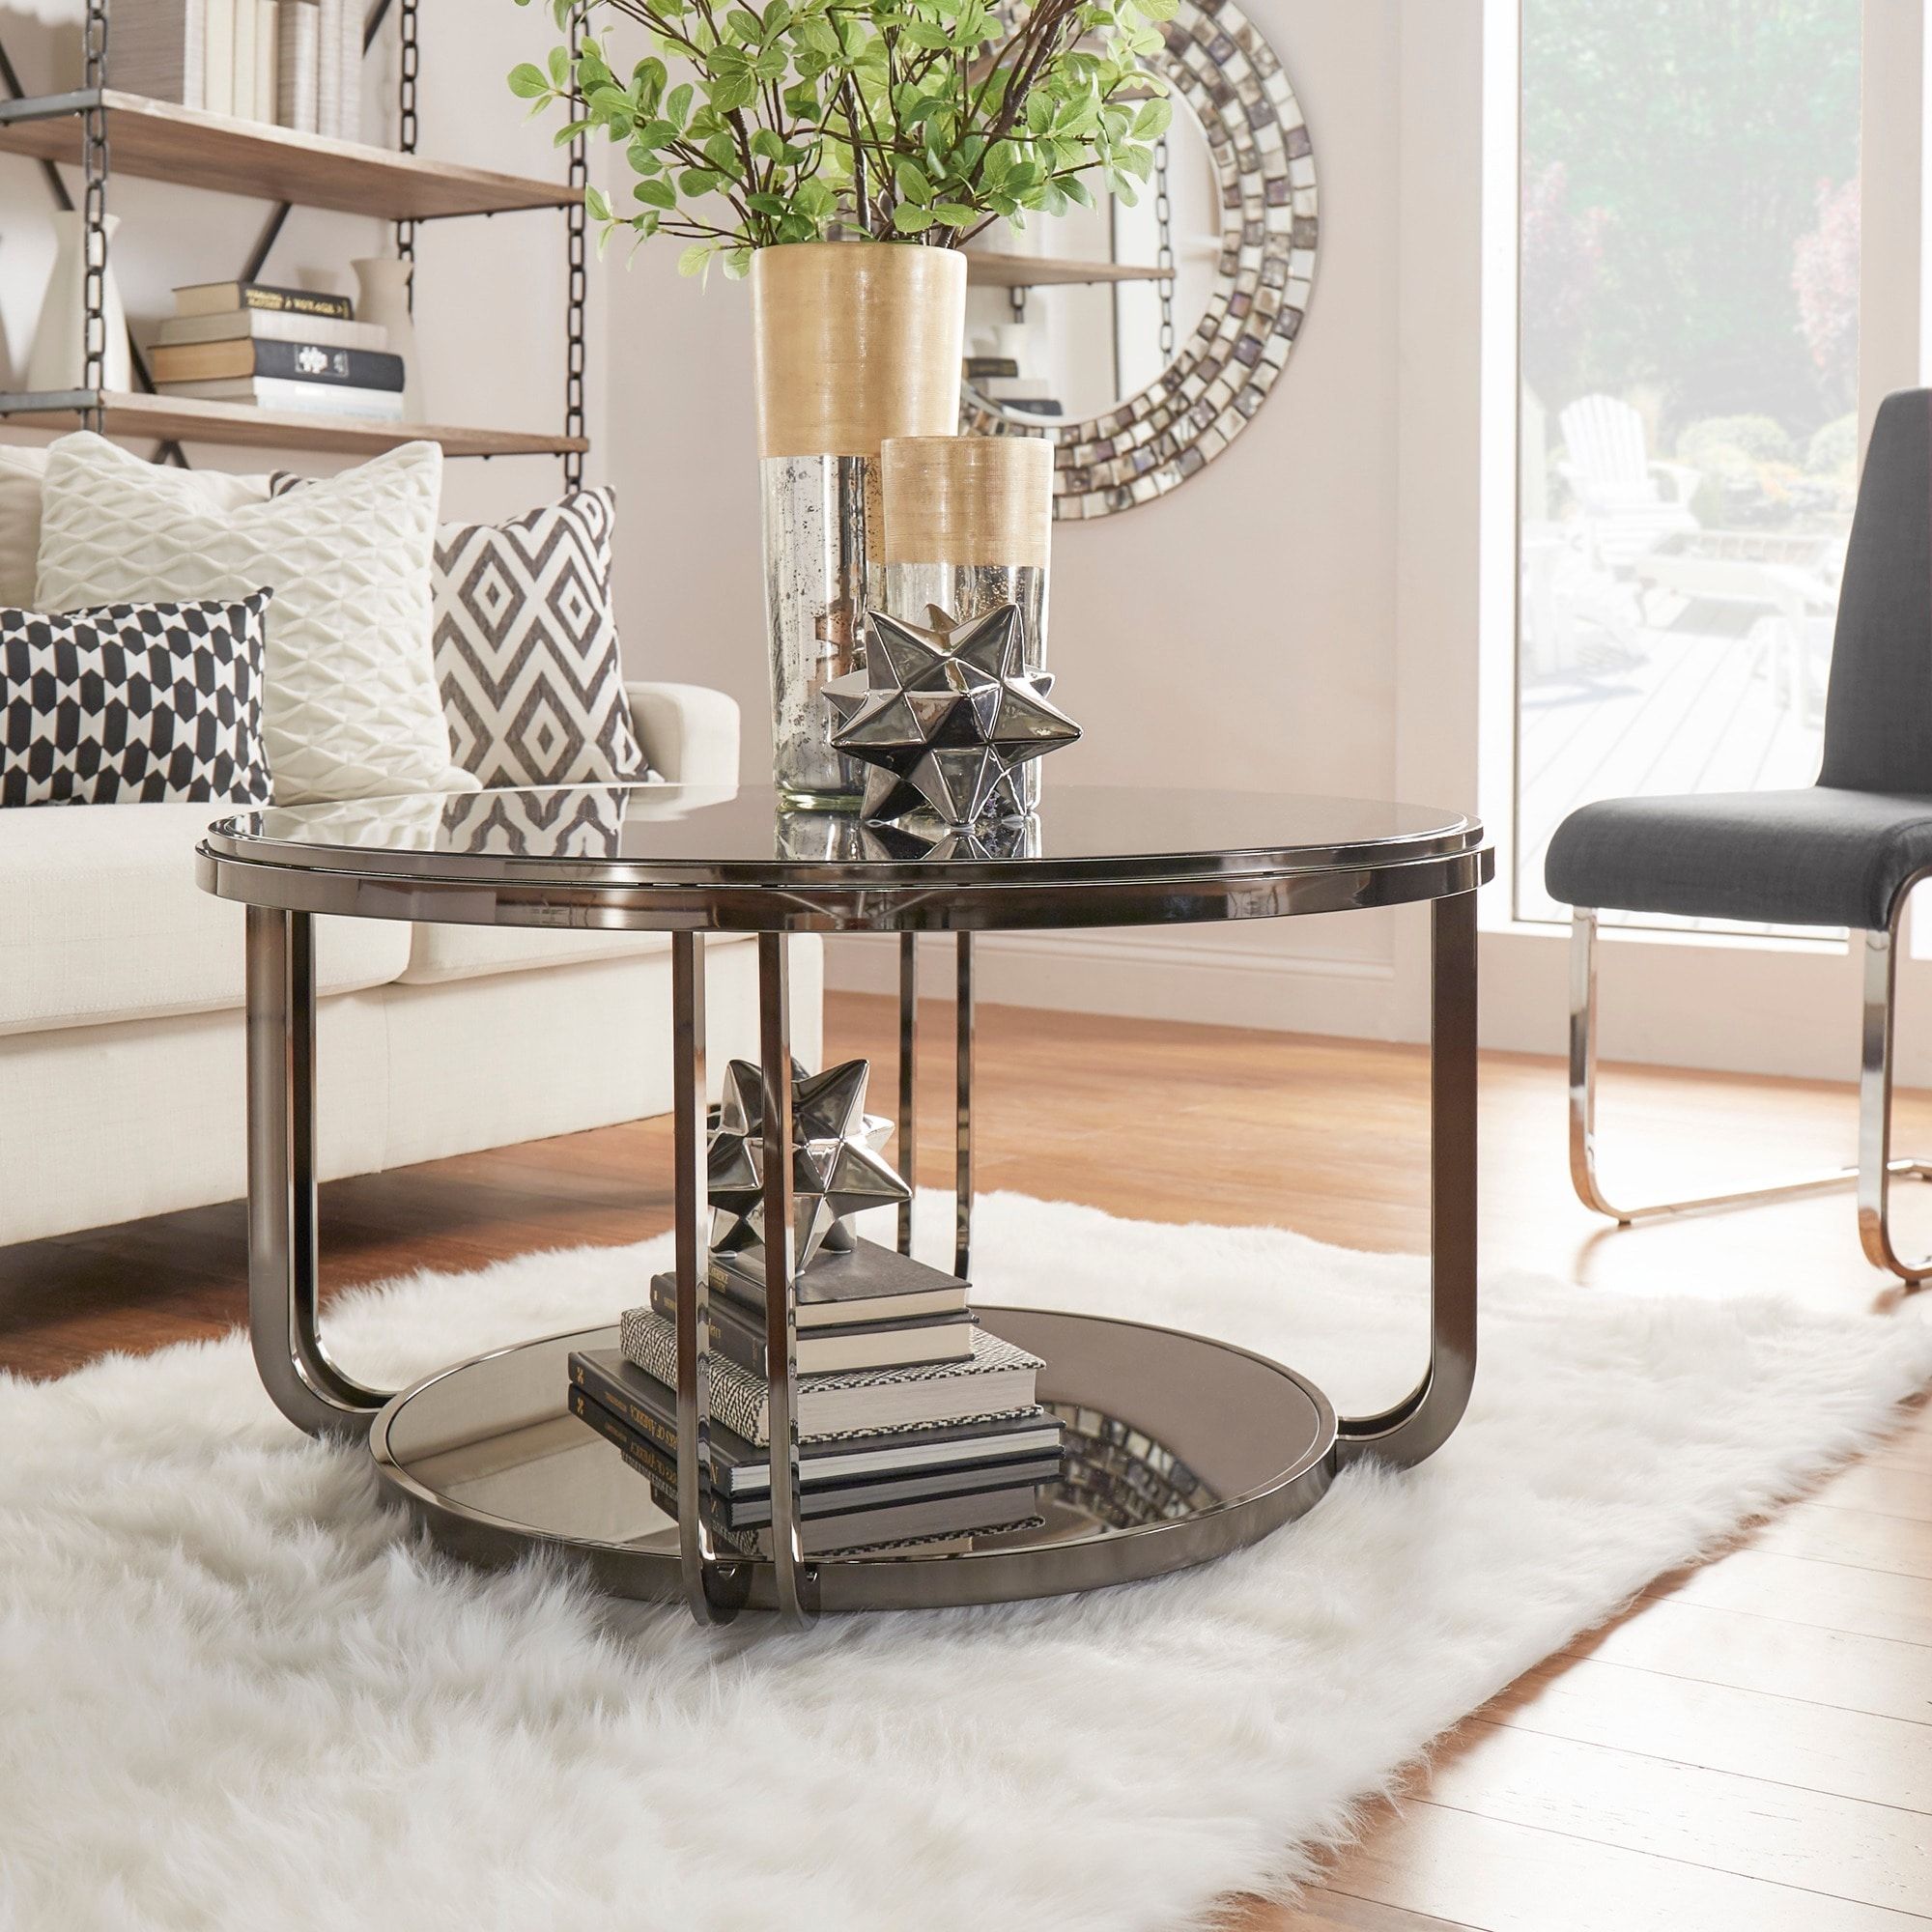 Shop Edison Black Nickel Plated Castered Modern Round Coffee Table Regarding Full Black Round Coffee Tables (Gallery 13 of 20)